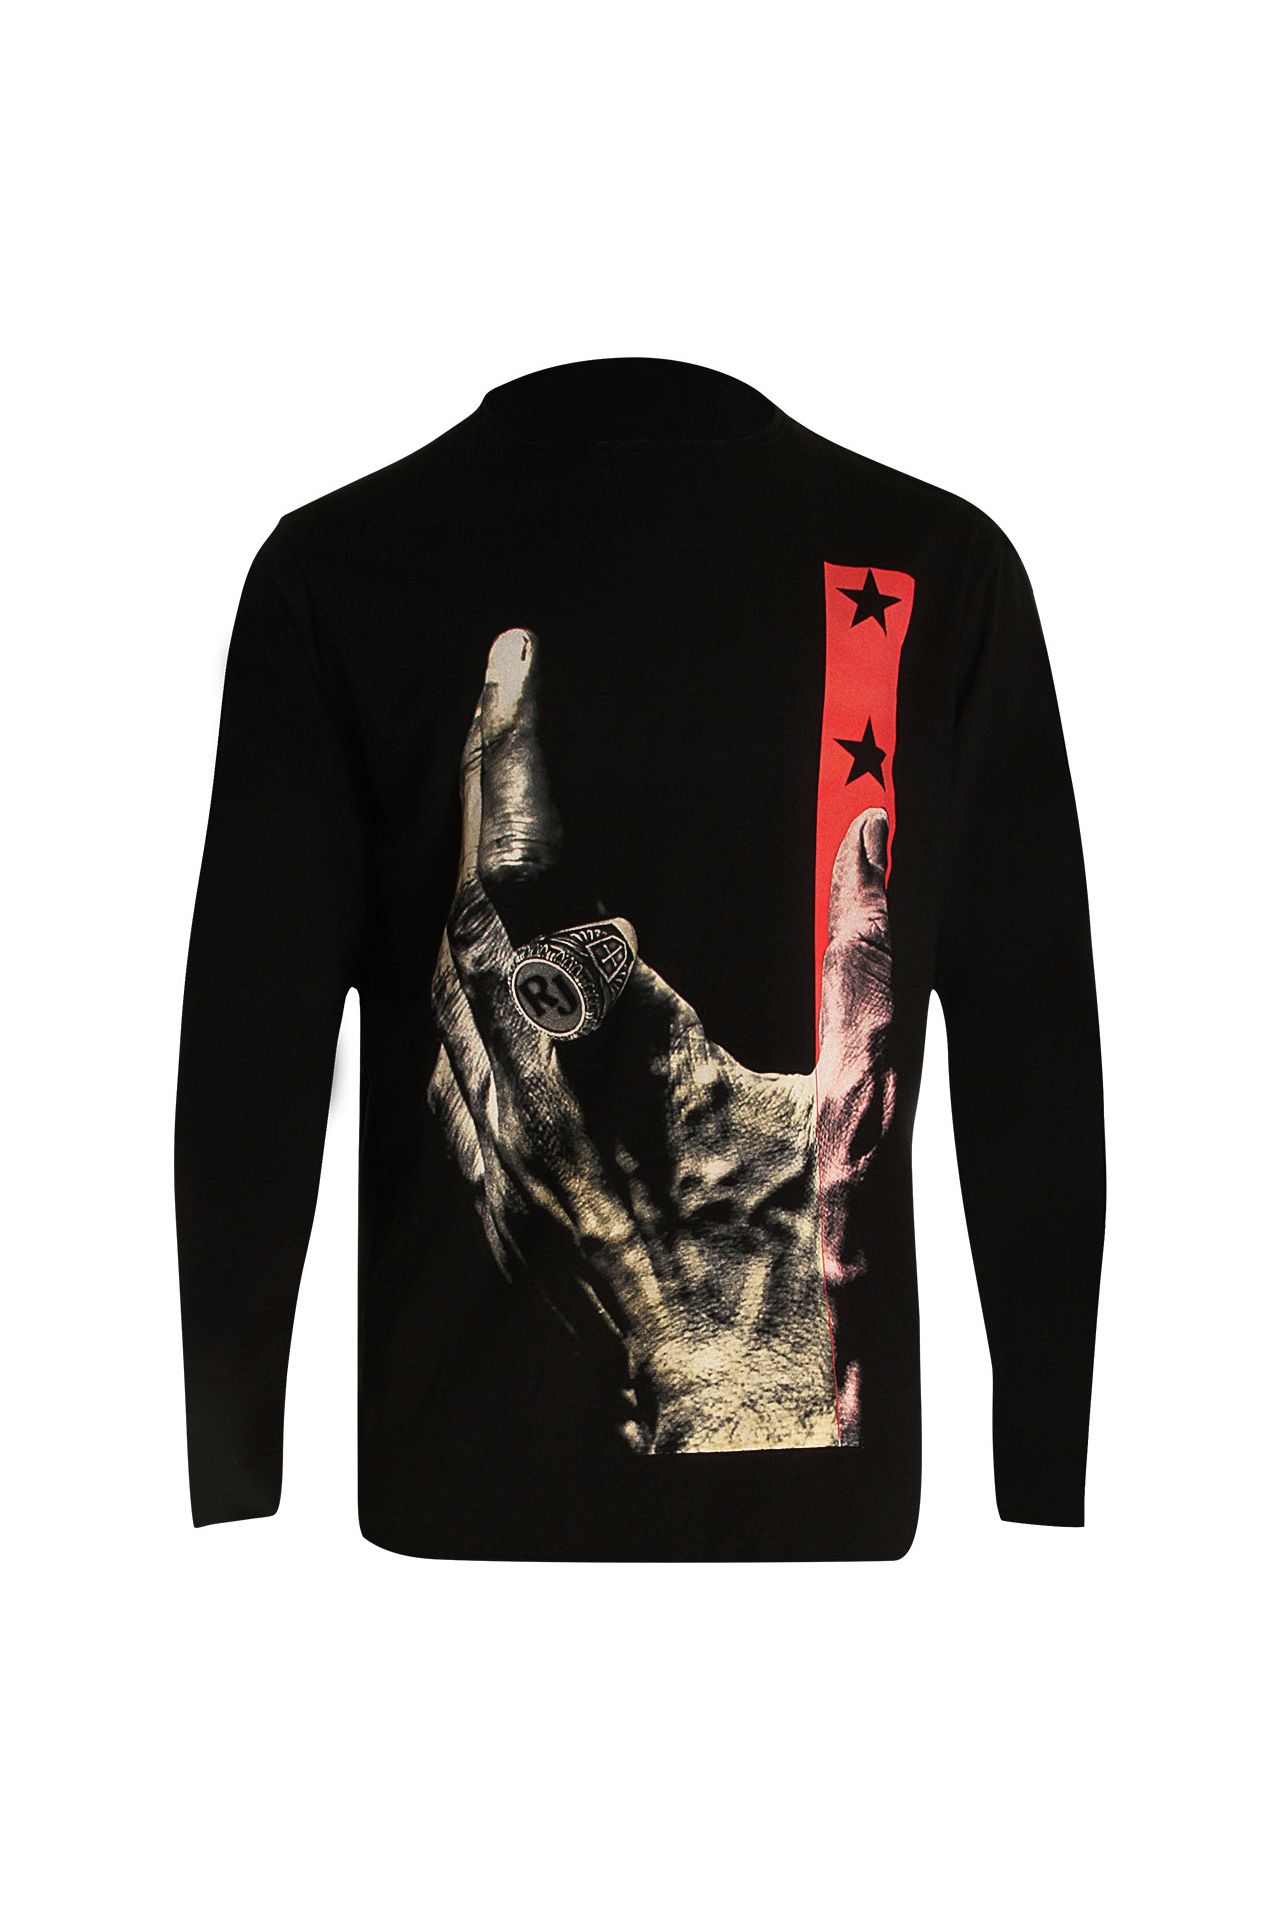 HAND OF GOLD LONG SLEEVE TEE IN BLACK